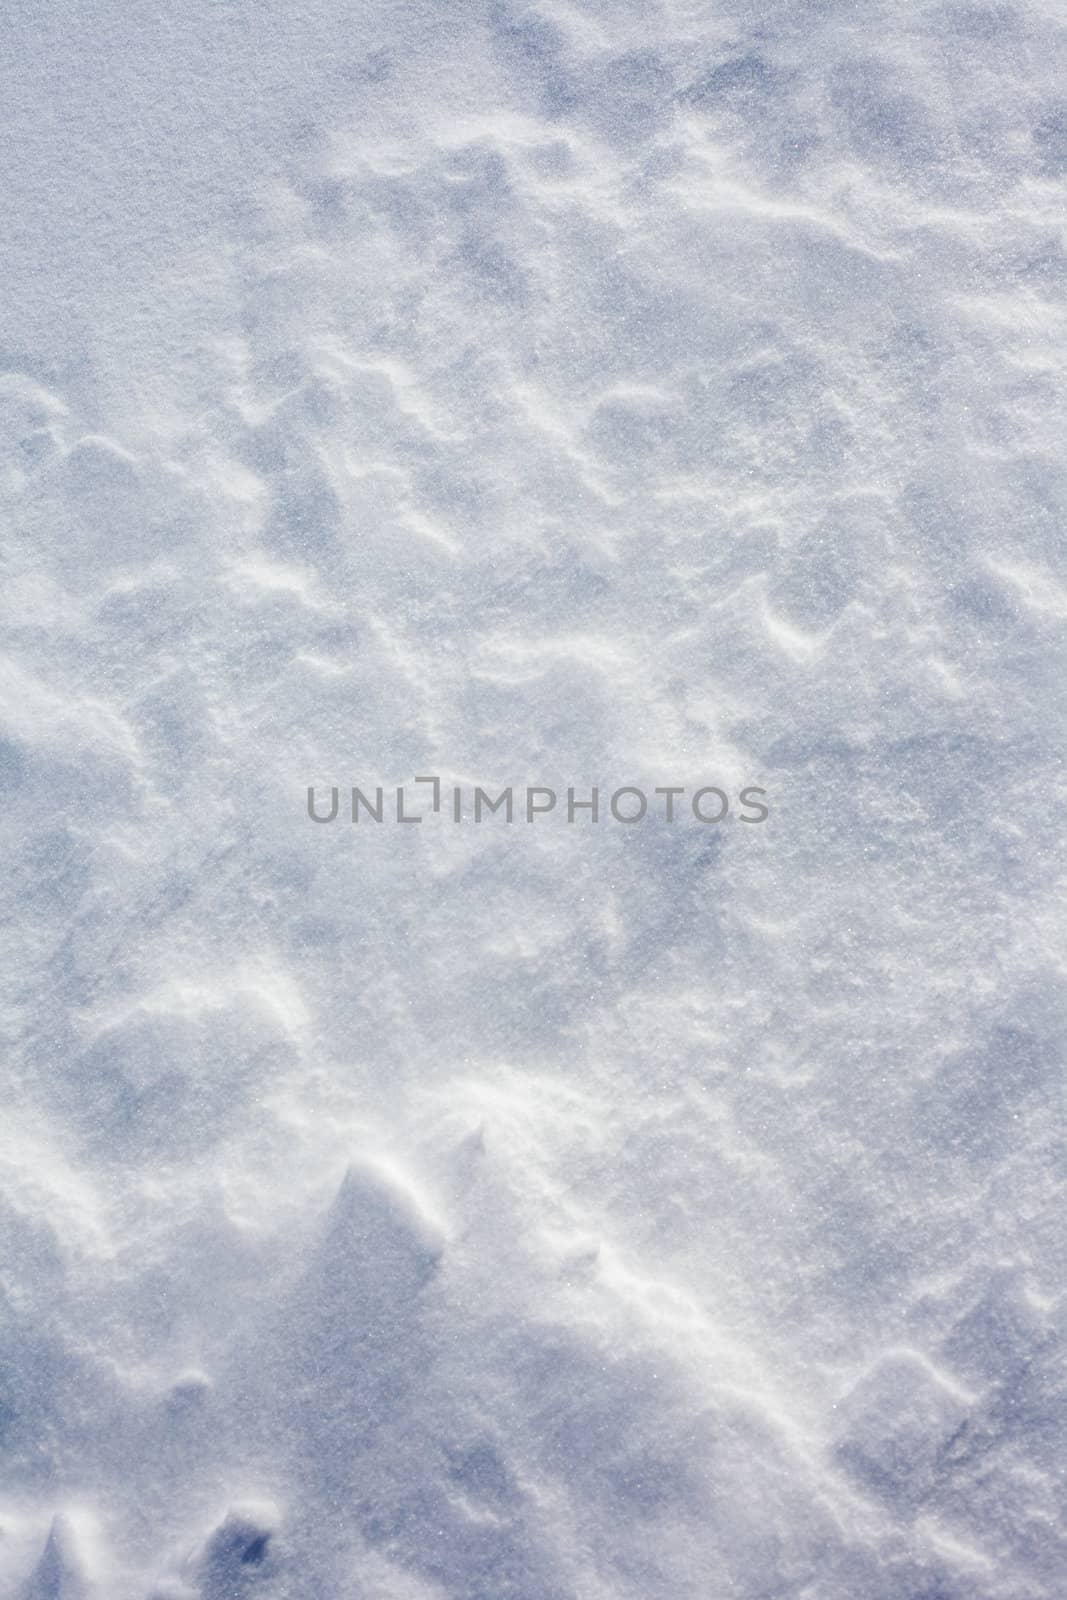 Snow surface full frame background texture pattern by PiLens